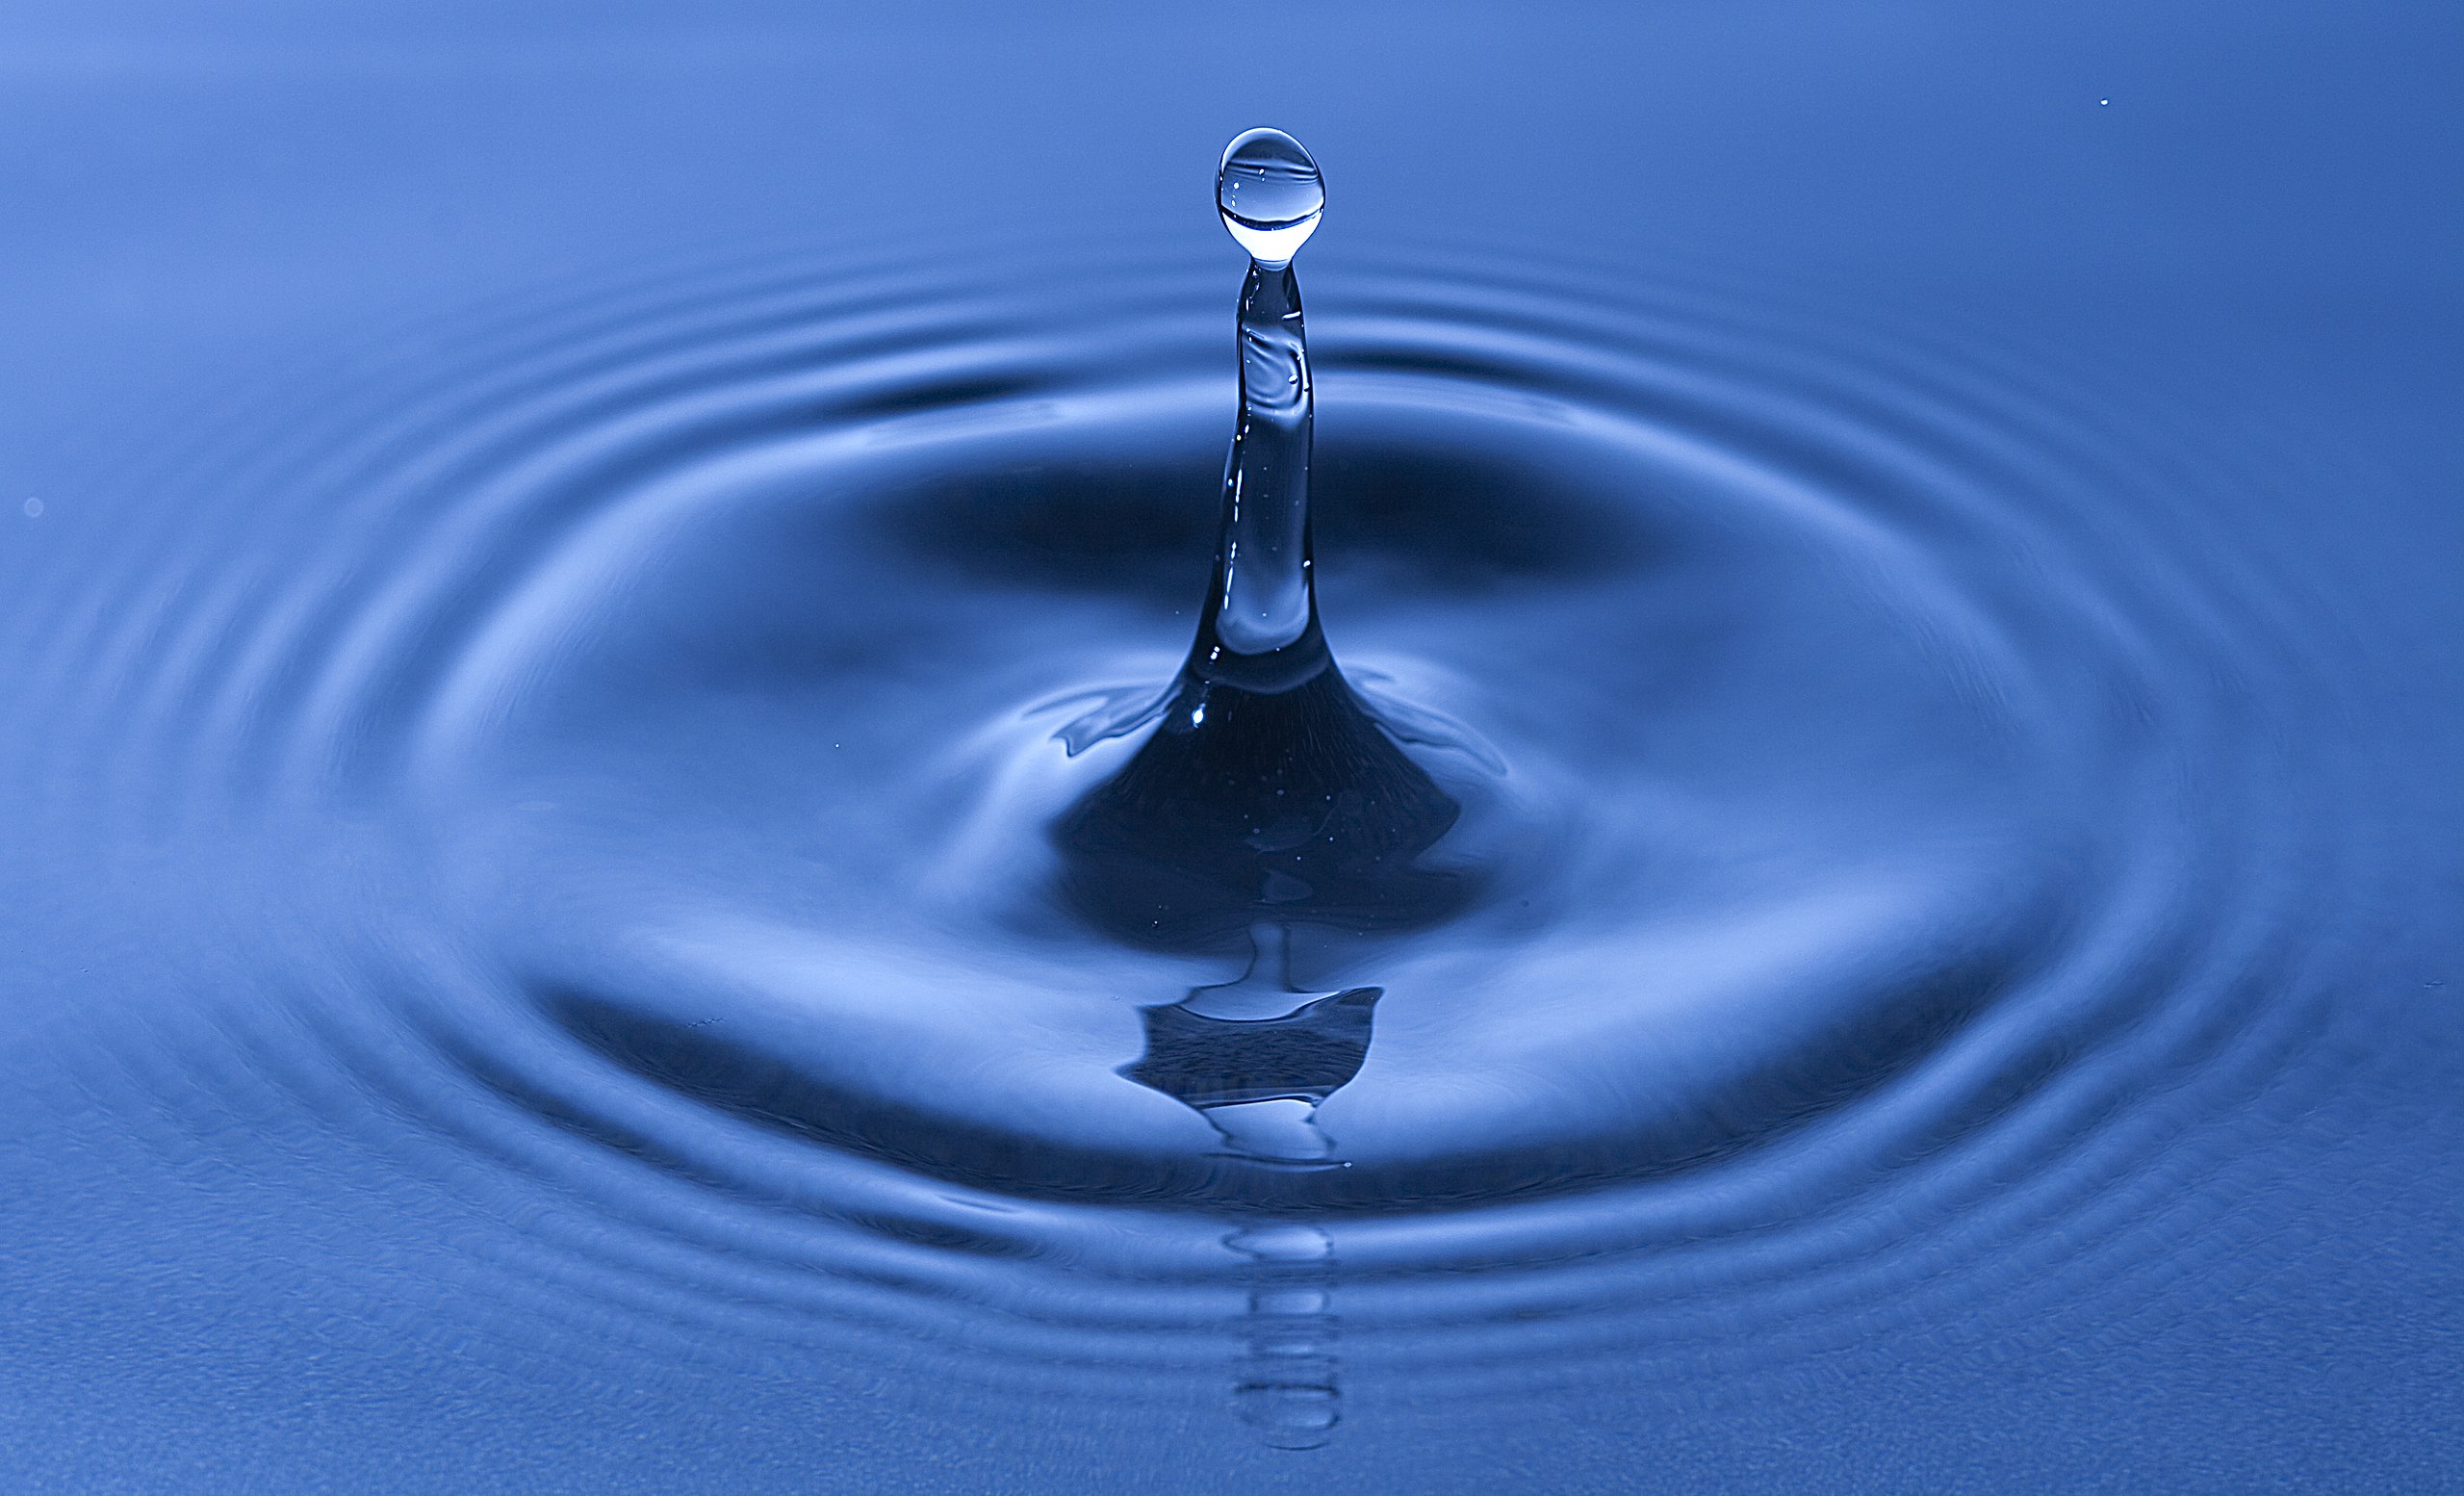 https://upload.wikimedia.org/wikipedia/commons/thumb/c/cc/Water_drop_impact_on_a_water-surface_-_%281%29.jpg/2560px-Water_drop_impact_on_a_water-surface_-_%281%29.jpg